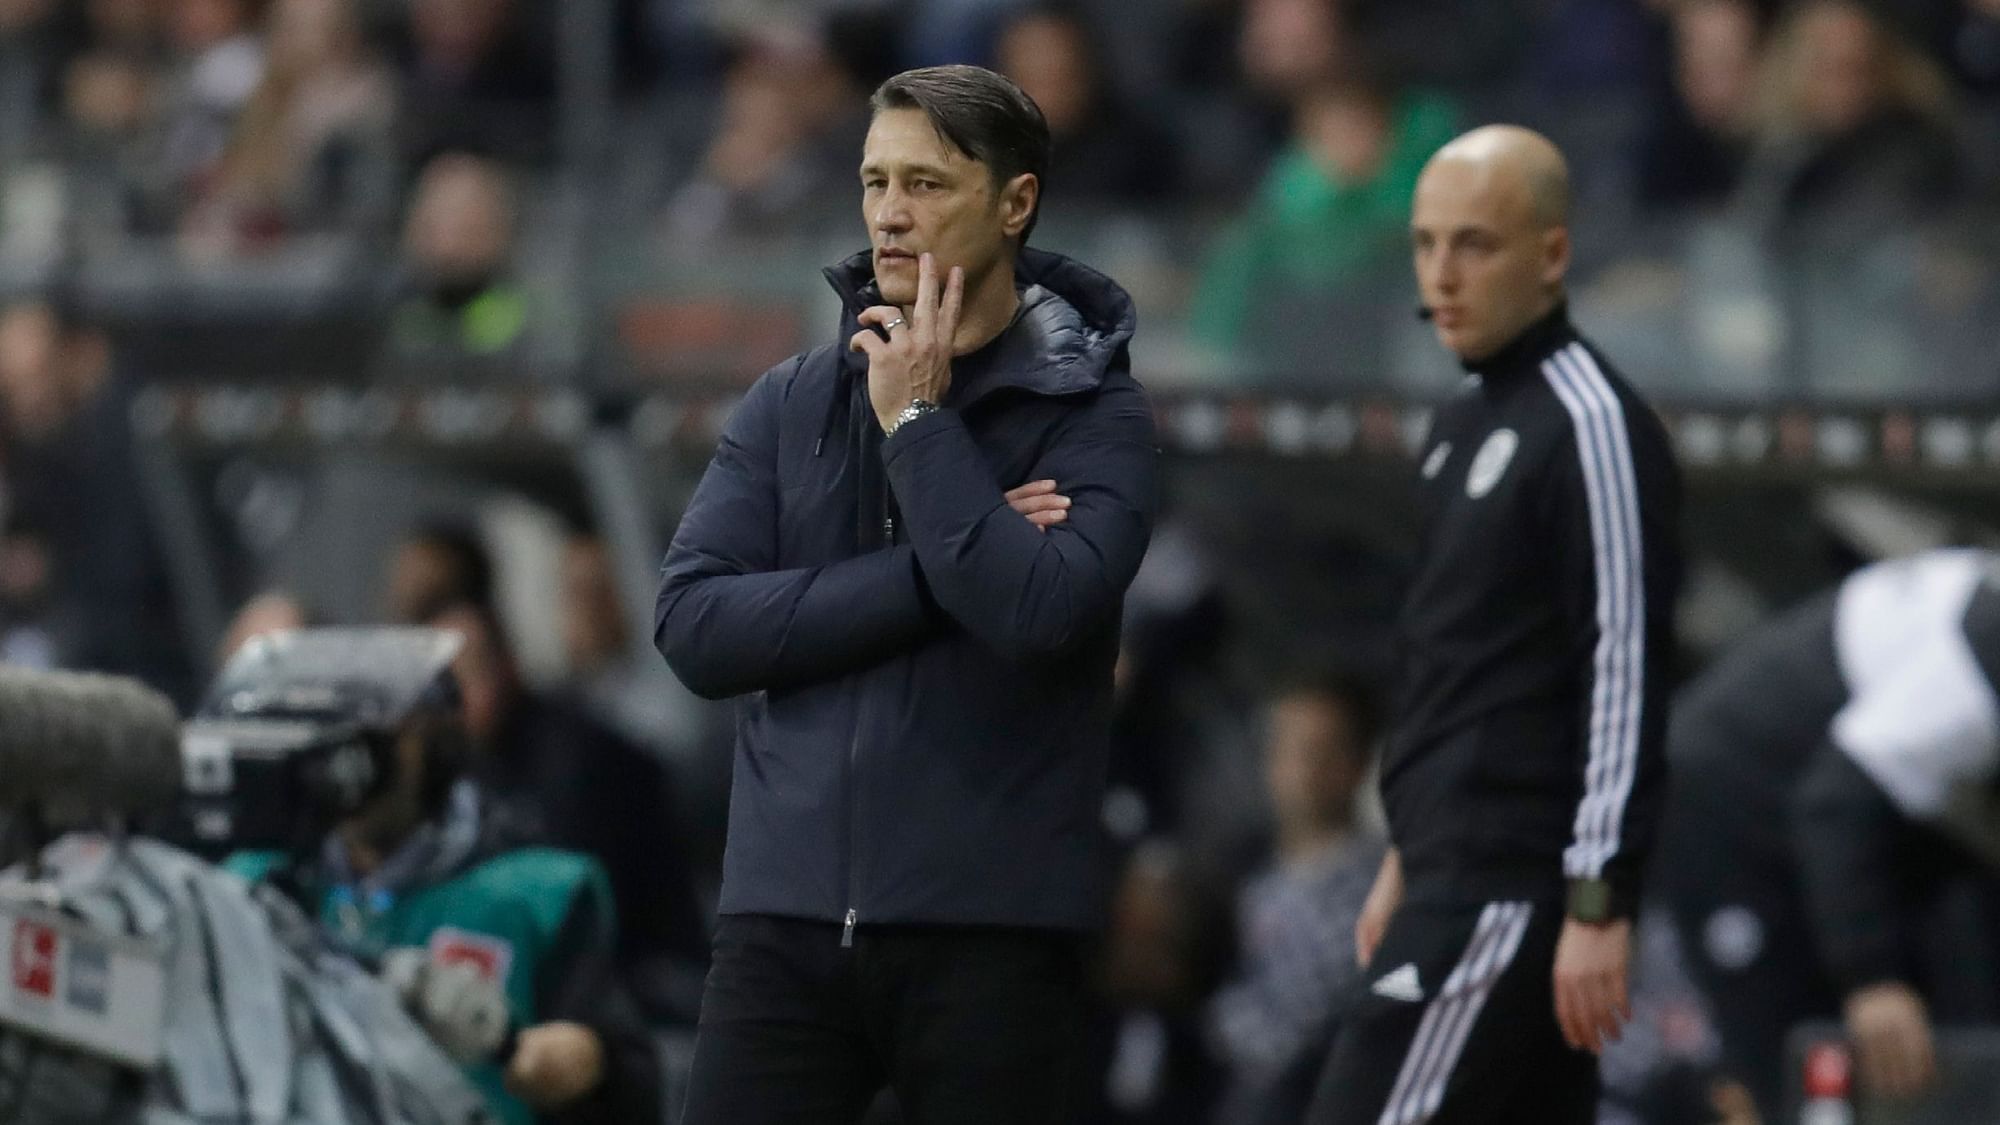 Niko Kovac was let go after a 5-1 loss to Eintrach Frankfurt which left Bayern in third place in the Bundesliga.